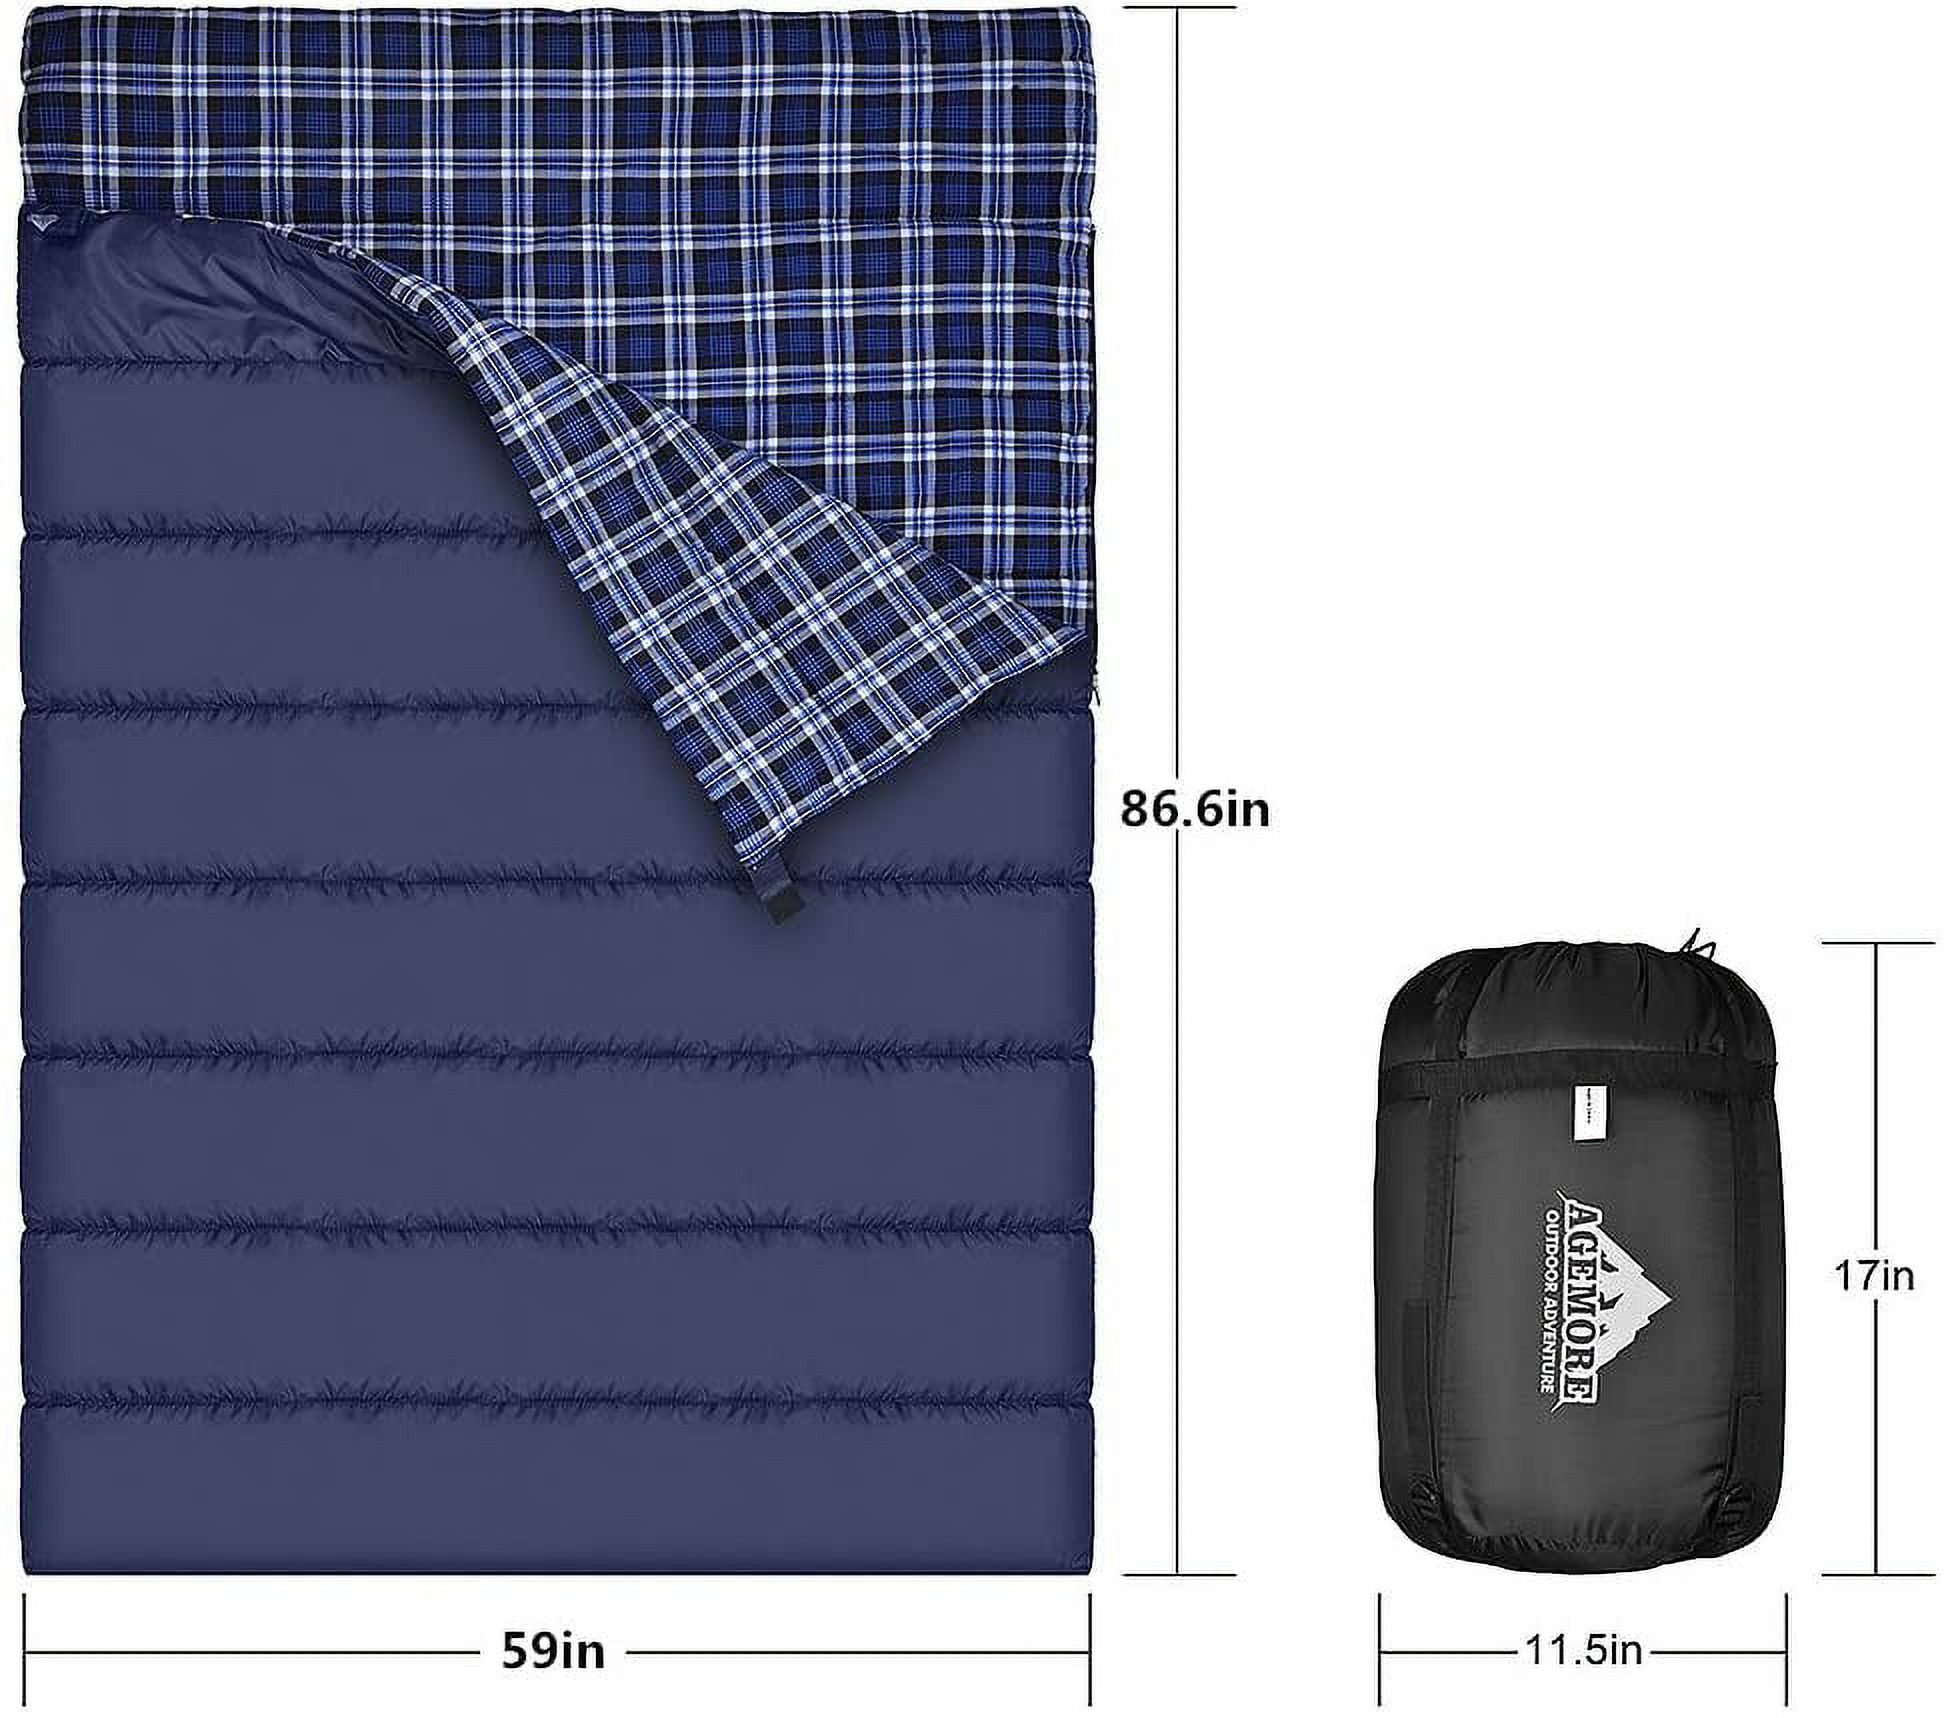 Cotton Flannel Double Sleeping Bag for Camping, Backpacking, Or Hiking. Queen Size 2 Person Waterproof Sleeping Bag for Adults Or Teens. Truck, Tent, Or Sleeping Pad, Lightweight（Pillows NOT Include） - image 2 of 4